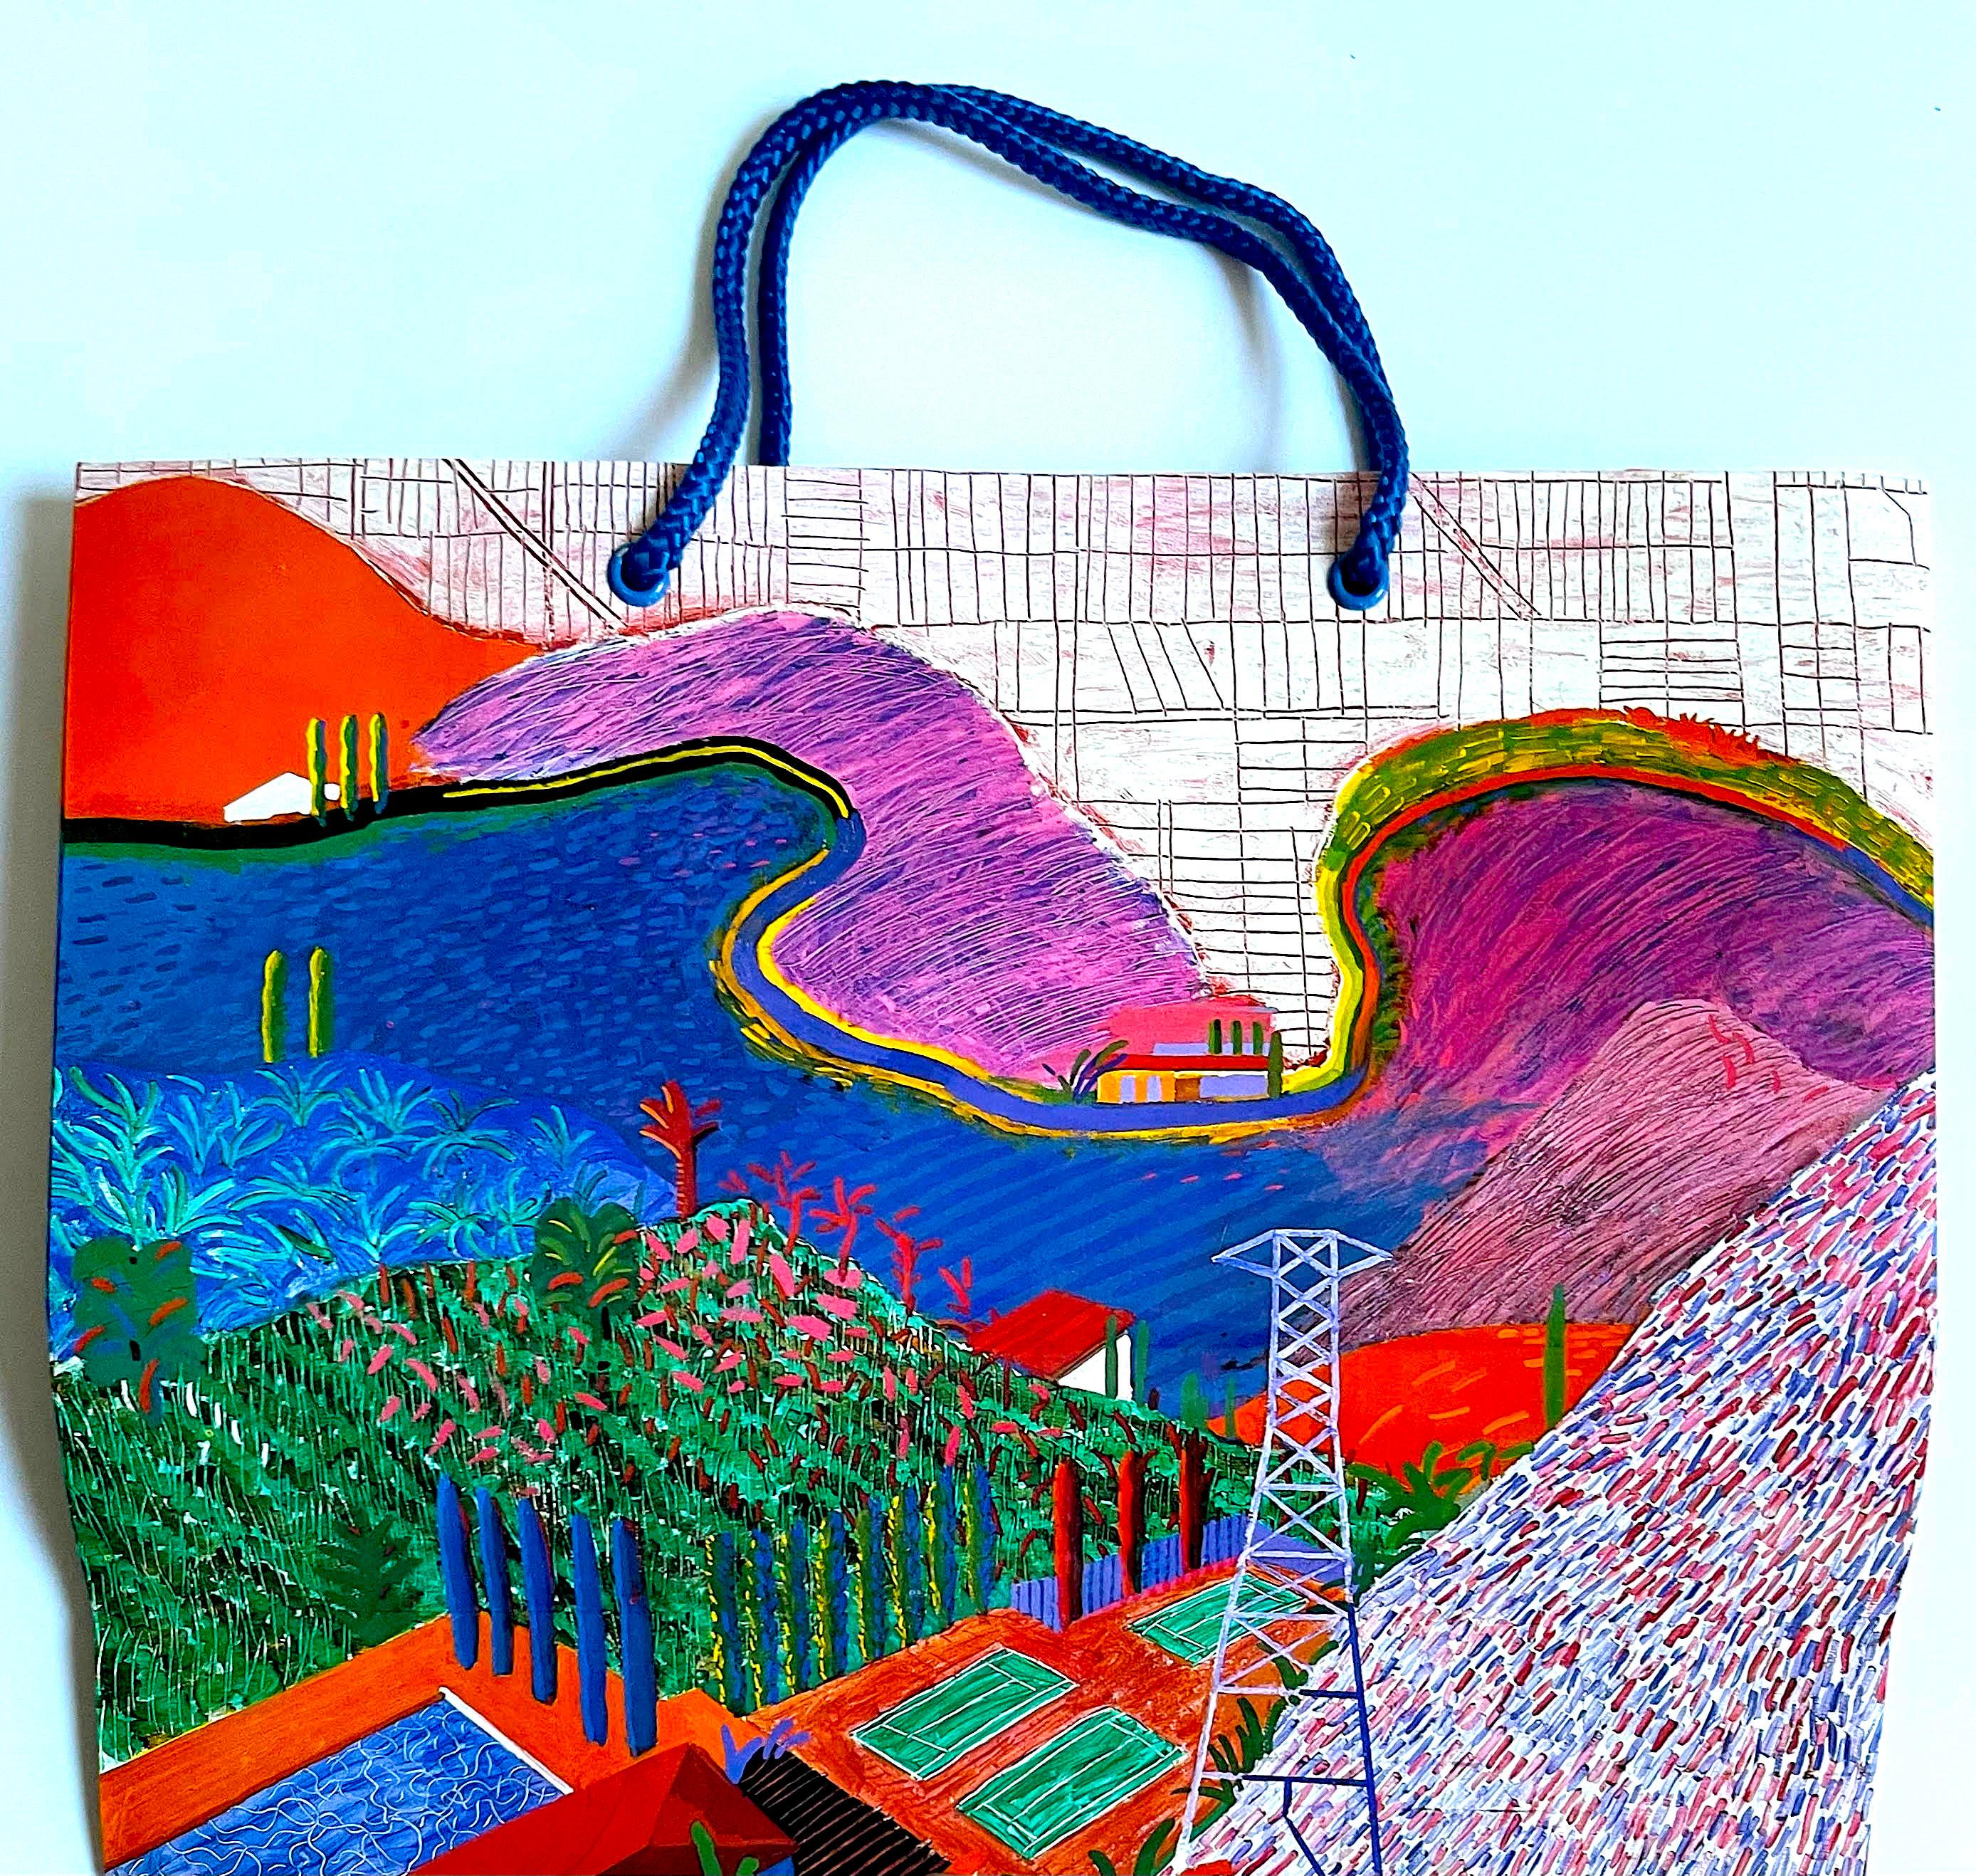 David Hockney
LA County Museum of Art (LACMA) VIP Promotional Shopping Bag, 1988
Silkscreen Paper Bag
10 1/2 × 13 1/2 inches x 2.5 inches
This uncommon David Hockney shopping bag was created, with the artist's collaboration/approval, exclusively for